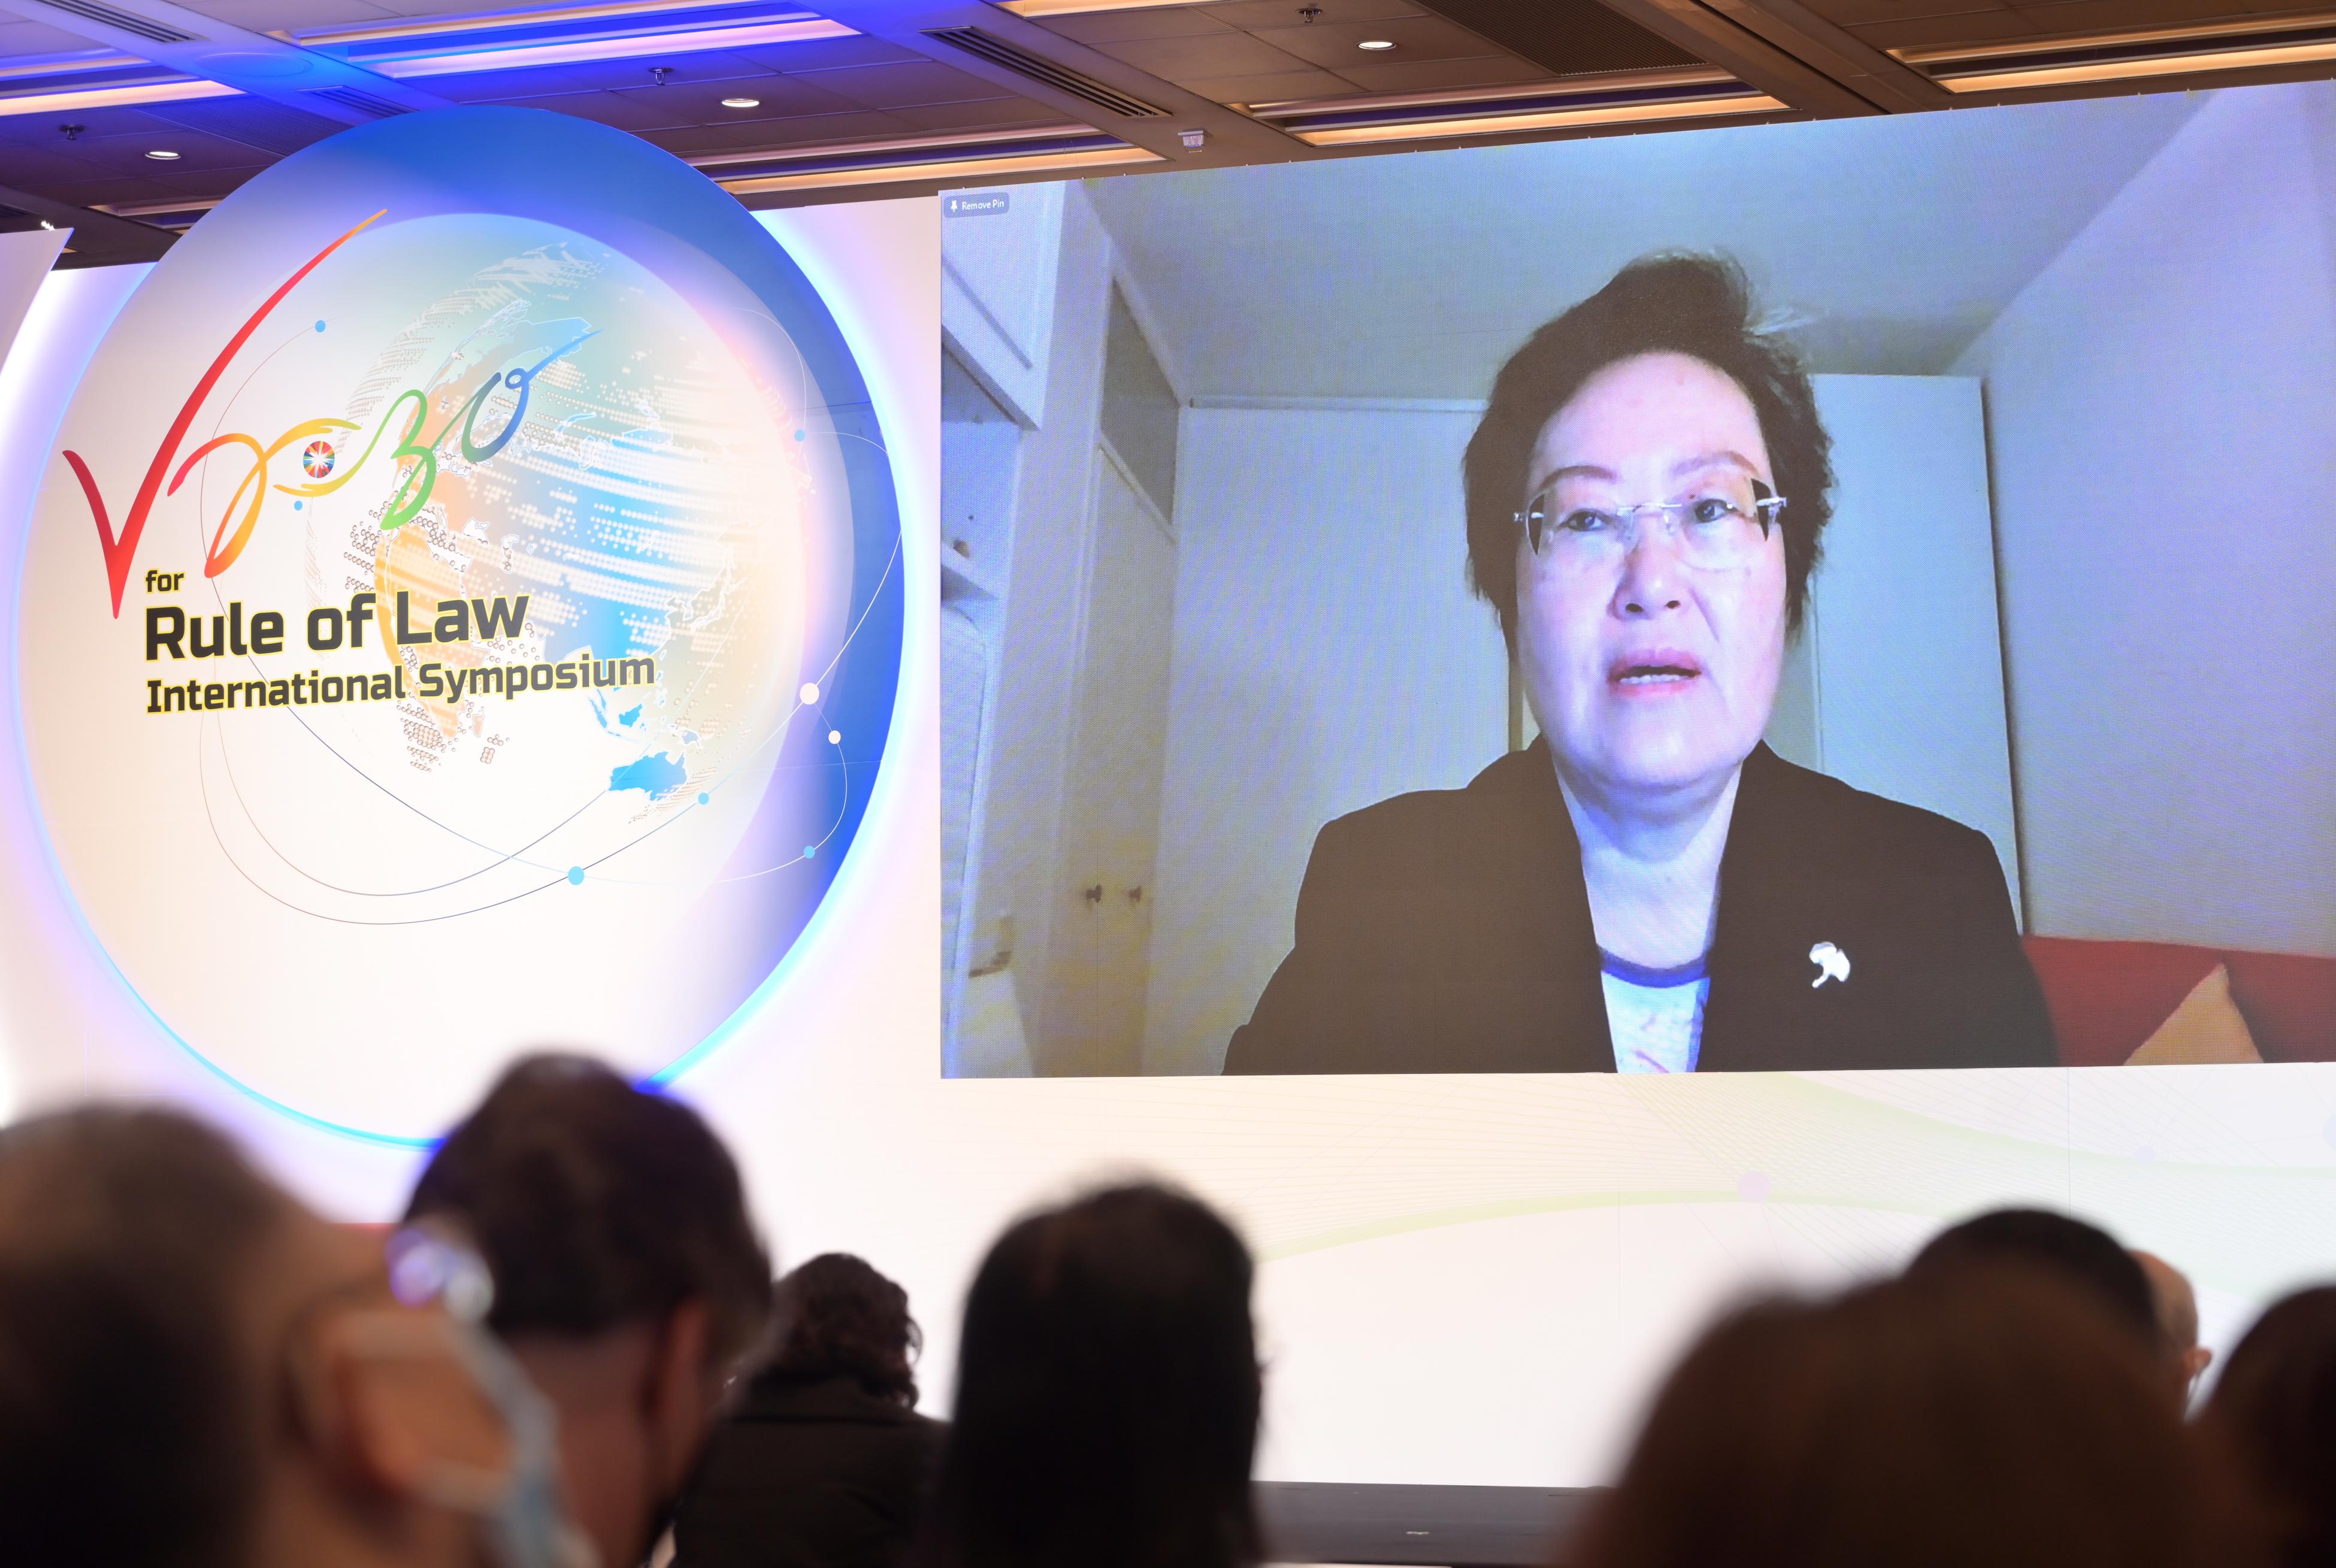 The Vision 2030 for Rule of Law International Symposium, co-organised by the Department of Justice, the Asian Peace and Reconciliation Council and the Asian Academy of International Law, was held today (May 26) in a hybrid format. Photo shows Judge Xue Hanqin of the International Court of Justice delivering a keynote speech at the forum.